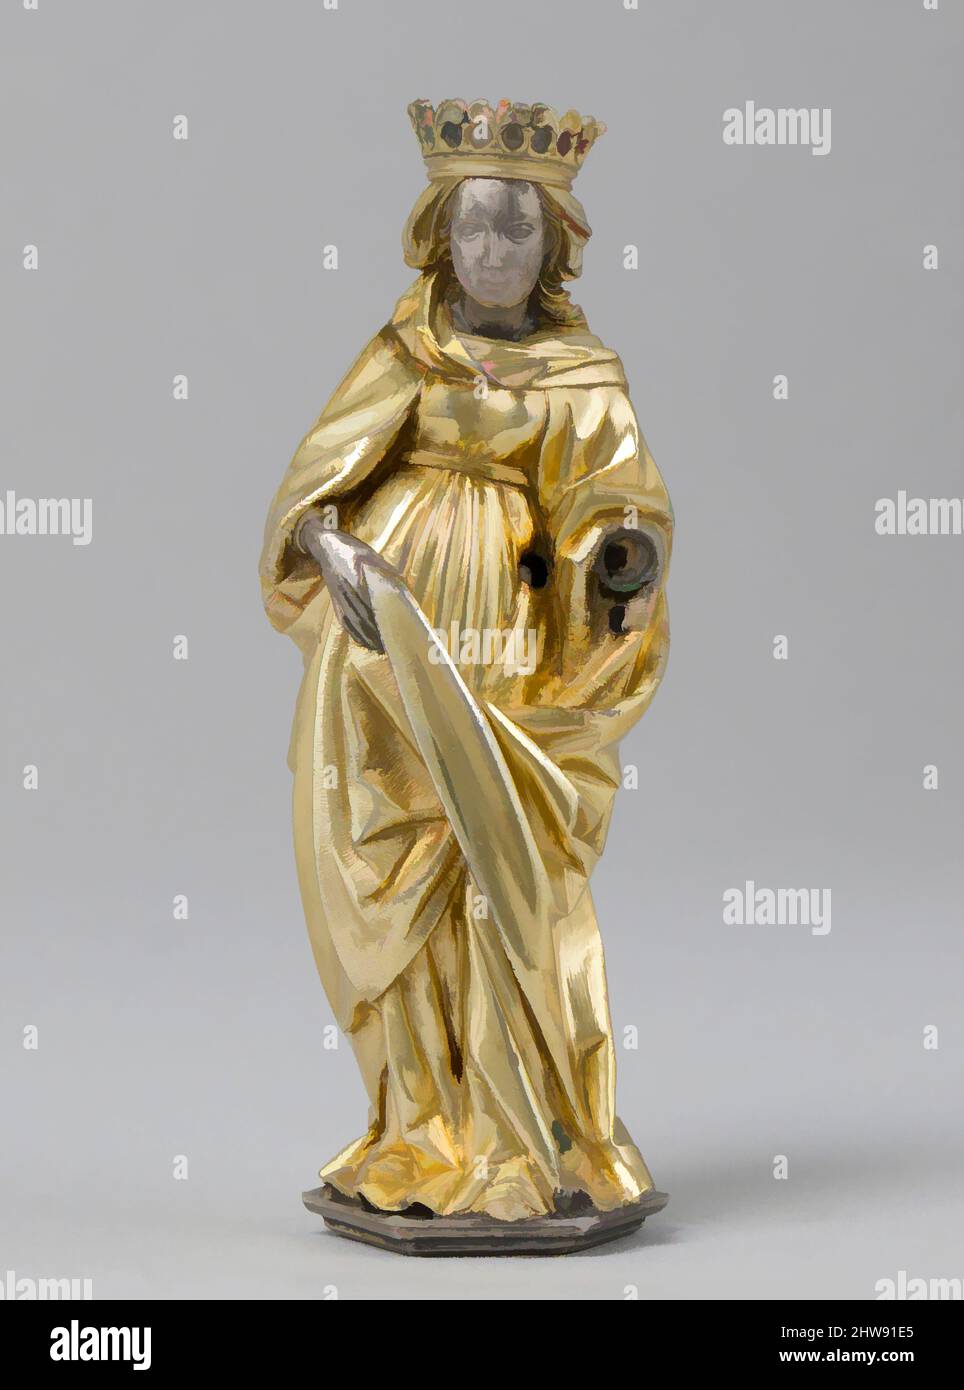 Art inspired by Standing Female Saint, ca. 1510, Made in Aachen, Germany, German, Silver and silver gilt, Overall: 3 3/4 x 1 5/16 x 1 1/4in. (9.5 x 3.4 x 3.1cm), Metalwork-Silver, Hans von Reutlingen (German, Aachen, 1465–1547) or Workshop, This finely worked figure appears to have, Classic works modernized by Artotop with a splash of modernity. Shapes, color and value, eye-catching visual impact on art. Emotions through freedom of artworks in a contemporary way. A timeless message pursuing a wildly creative new direction. Artists turning to the digital medium and creating the Artotop NFT Stock Photo